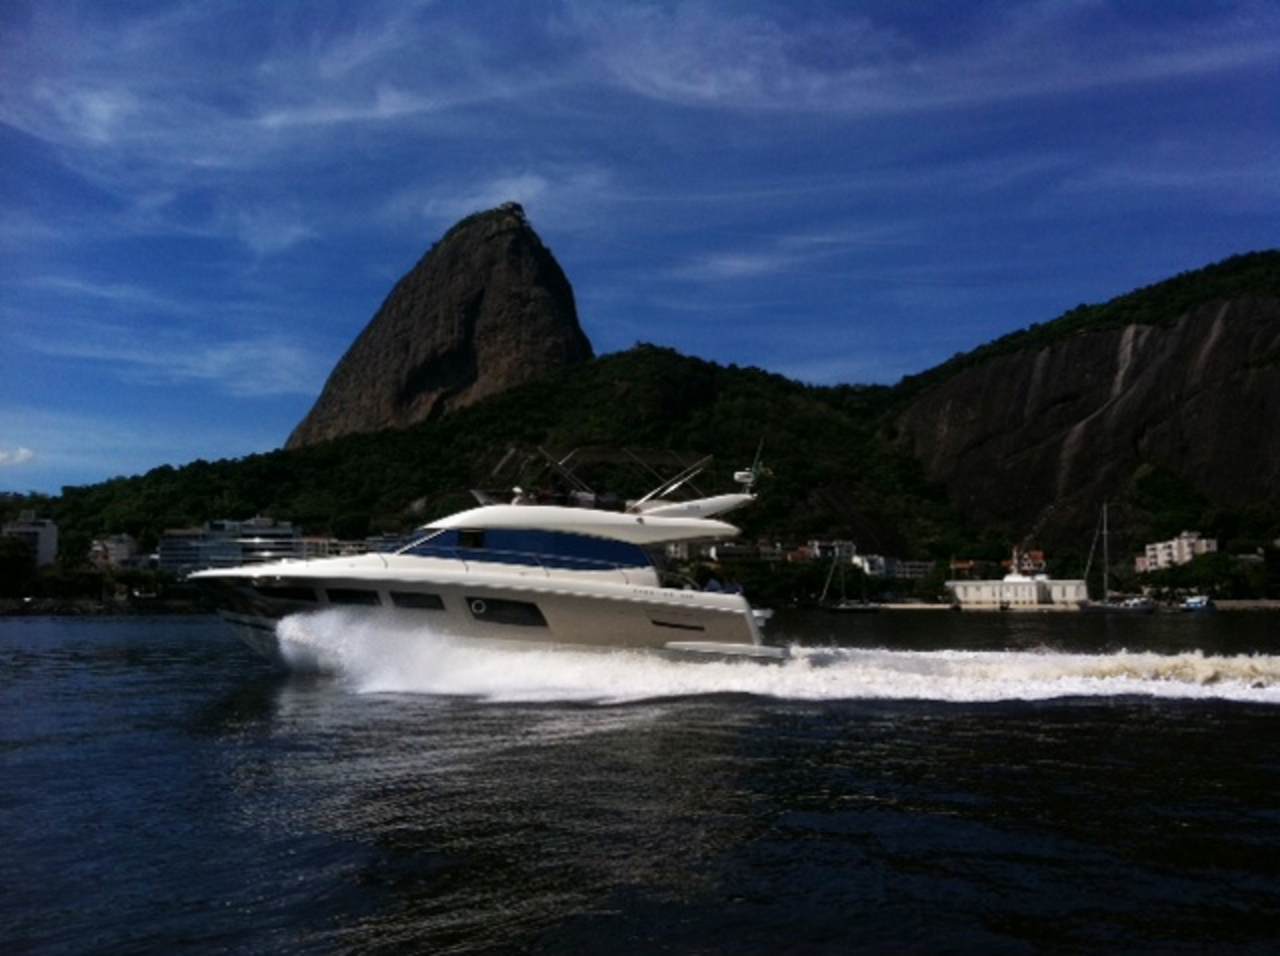 Rio boat show in pictures ! 2